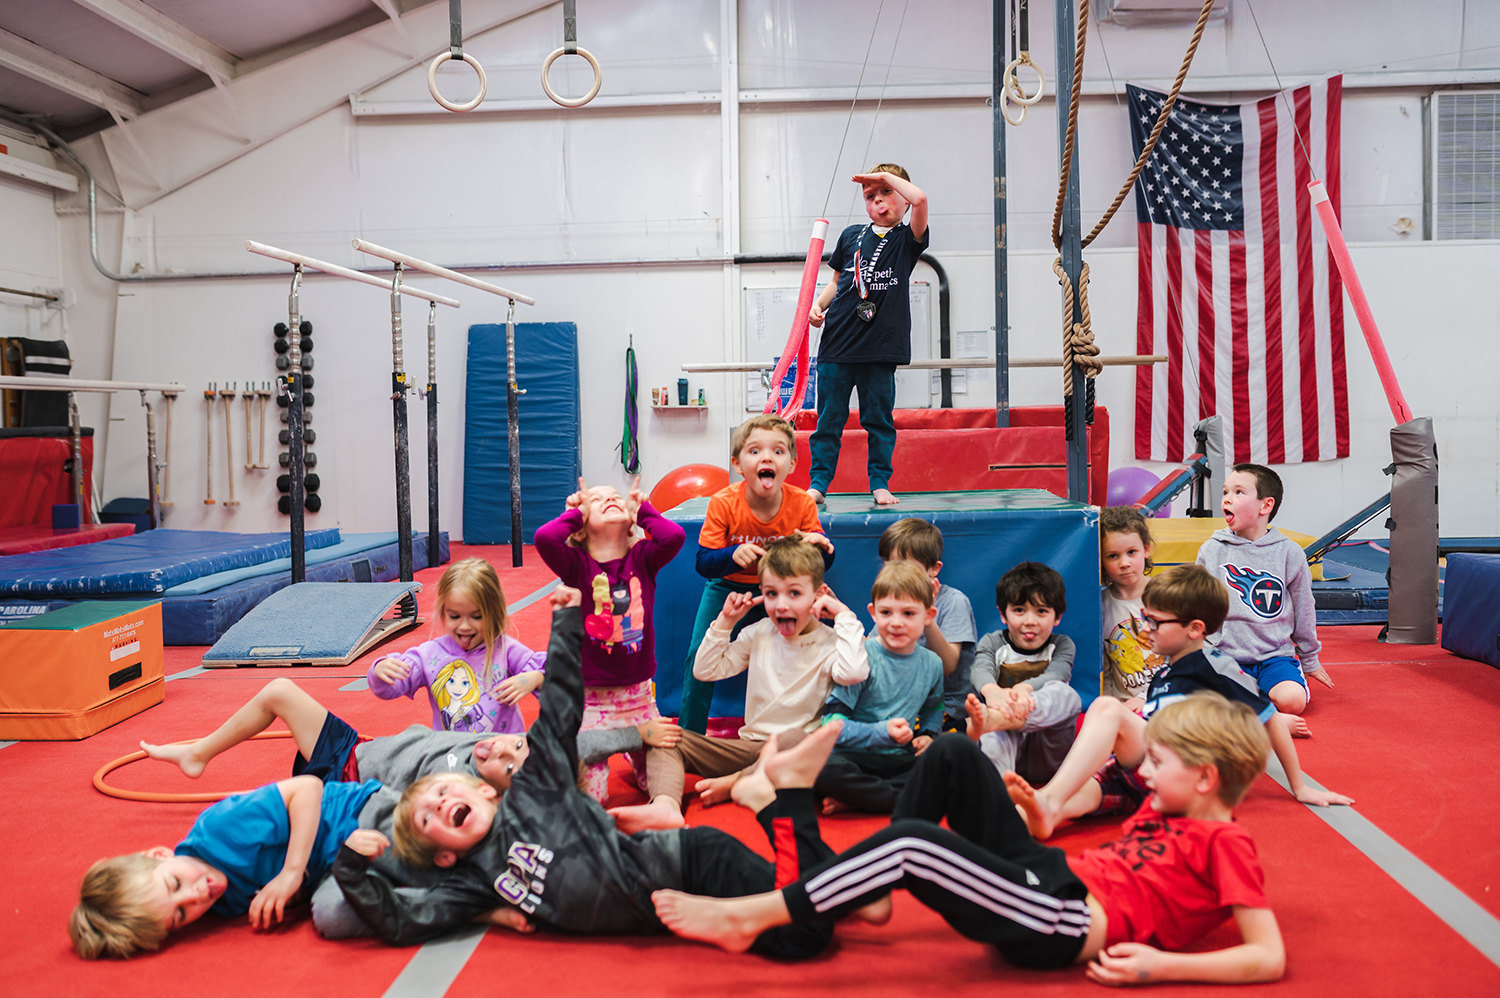 A young boy stands atop a gymnastics tumbling structure surrounded by friends who are celebrating his birthday. The children are making silly faces for the camera.